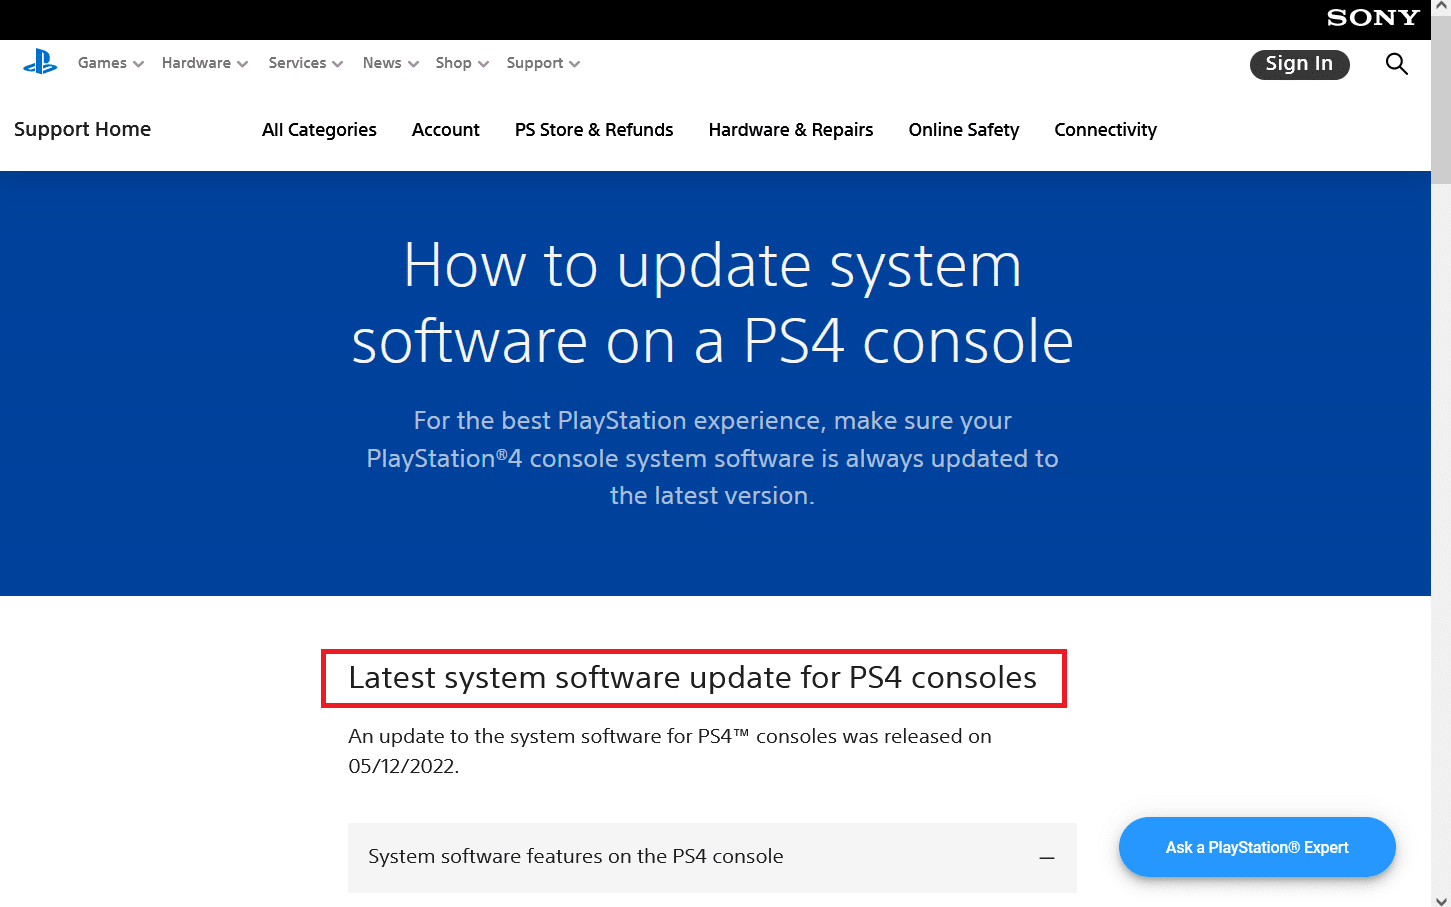 Download the latest PS4 update from the Official Playstation website and save it in the UPDATE folder